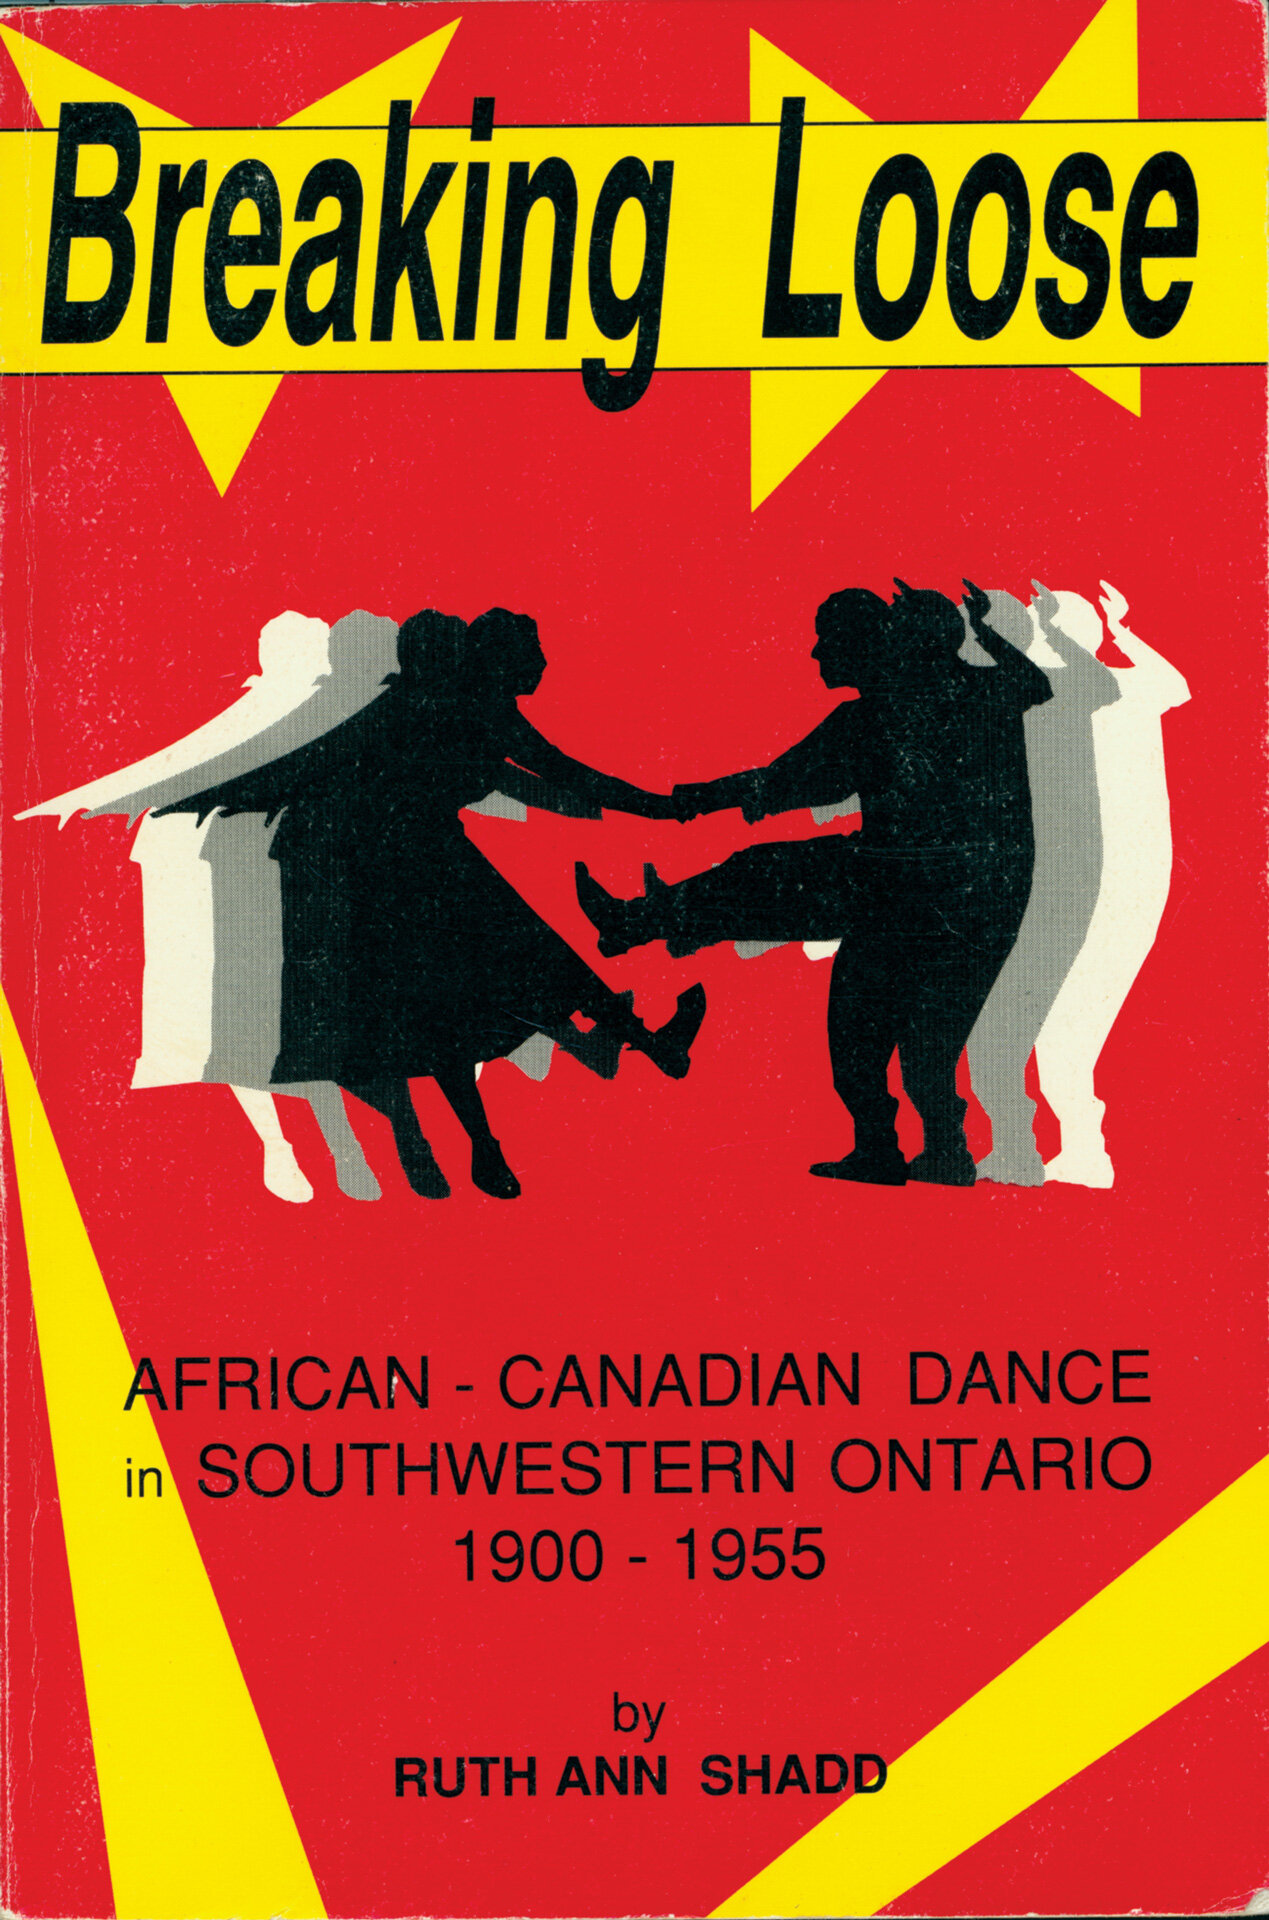 Breaking Loose: African-Canadian Dance in Southwestern Ontario 1900-1955 by Ruth Ann Shadd